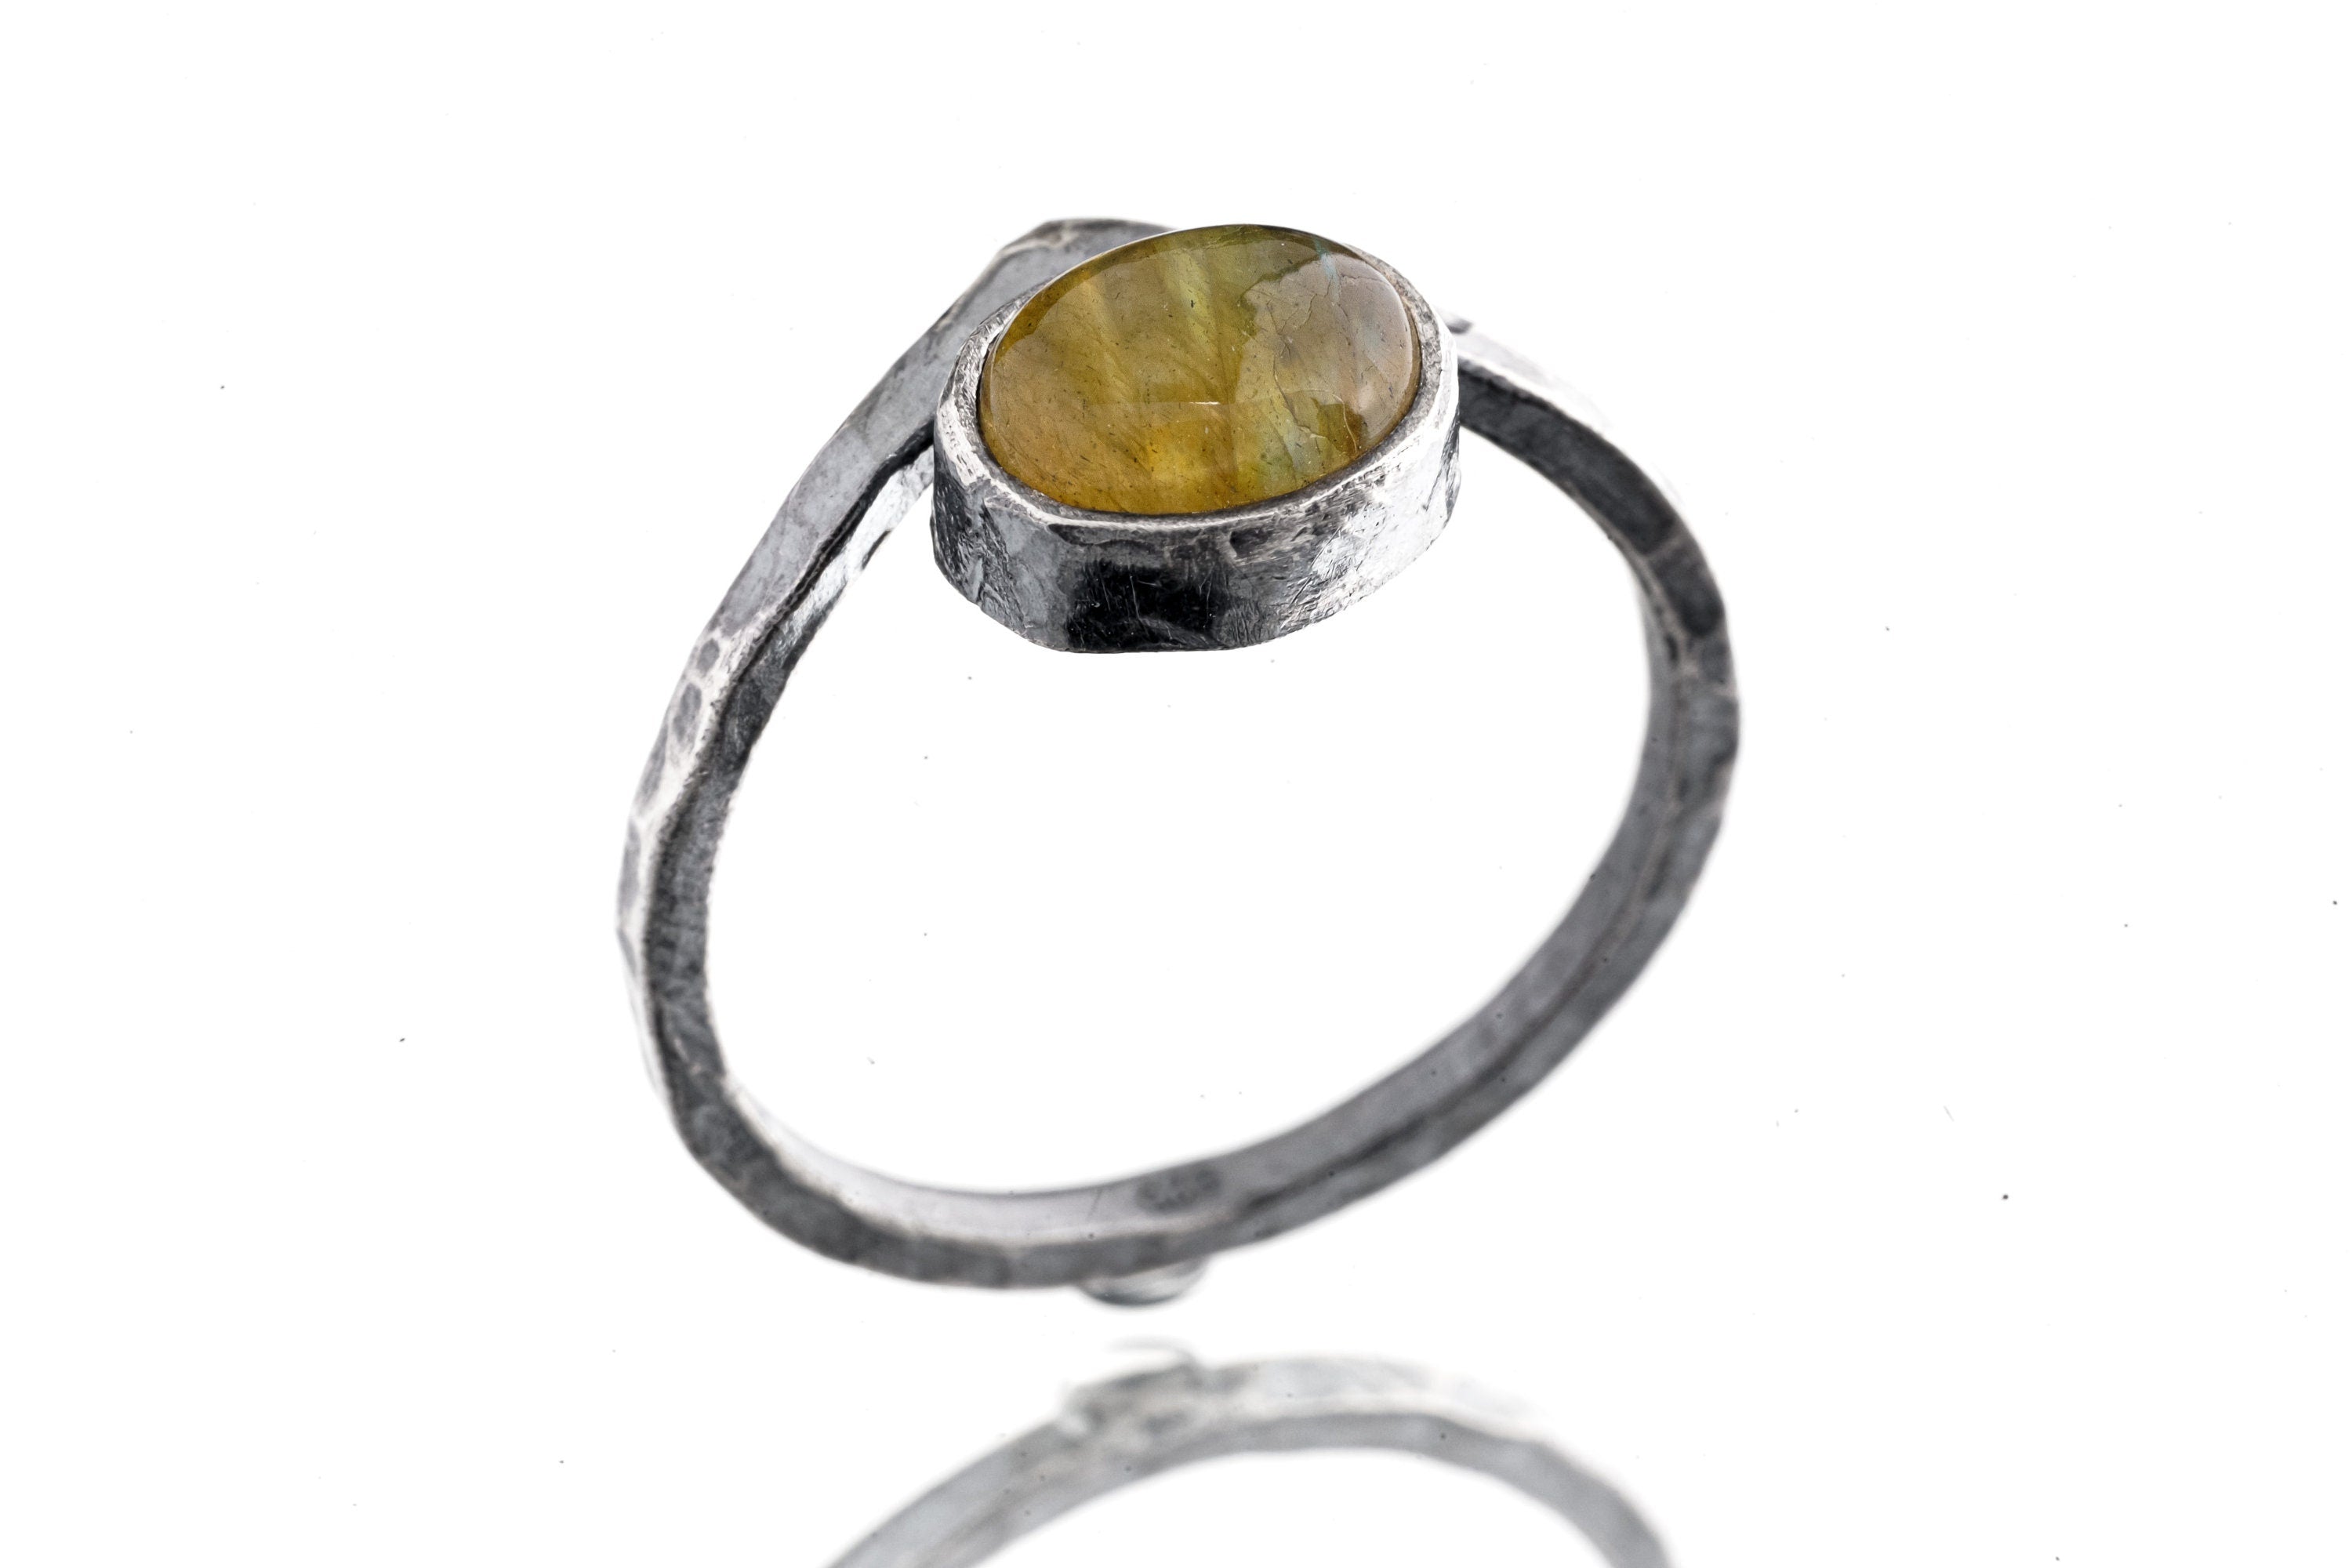 Golden Oval Rainbow Labradorite - Rustic Boho Stack Ring - Hammered Oxidised Triangle Band - 925 Sterling Silver - Size 4.5 - 8 US